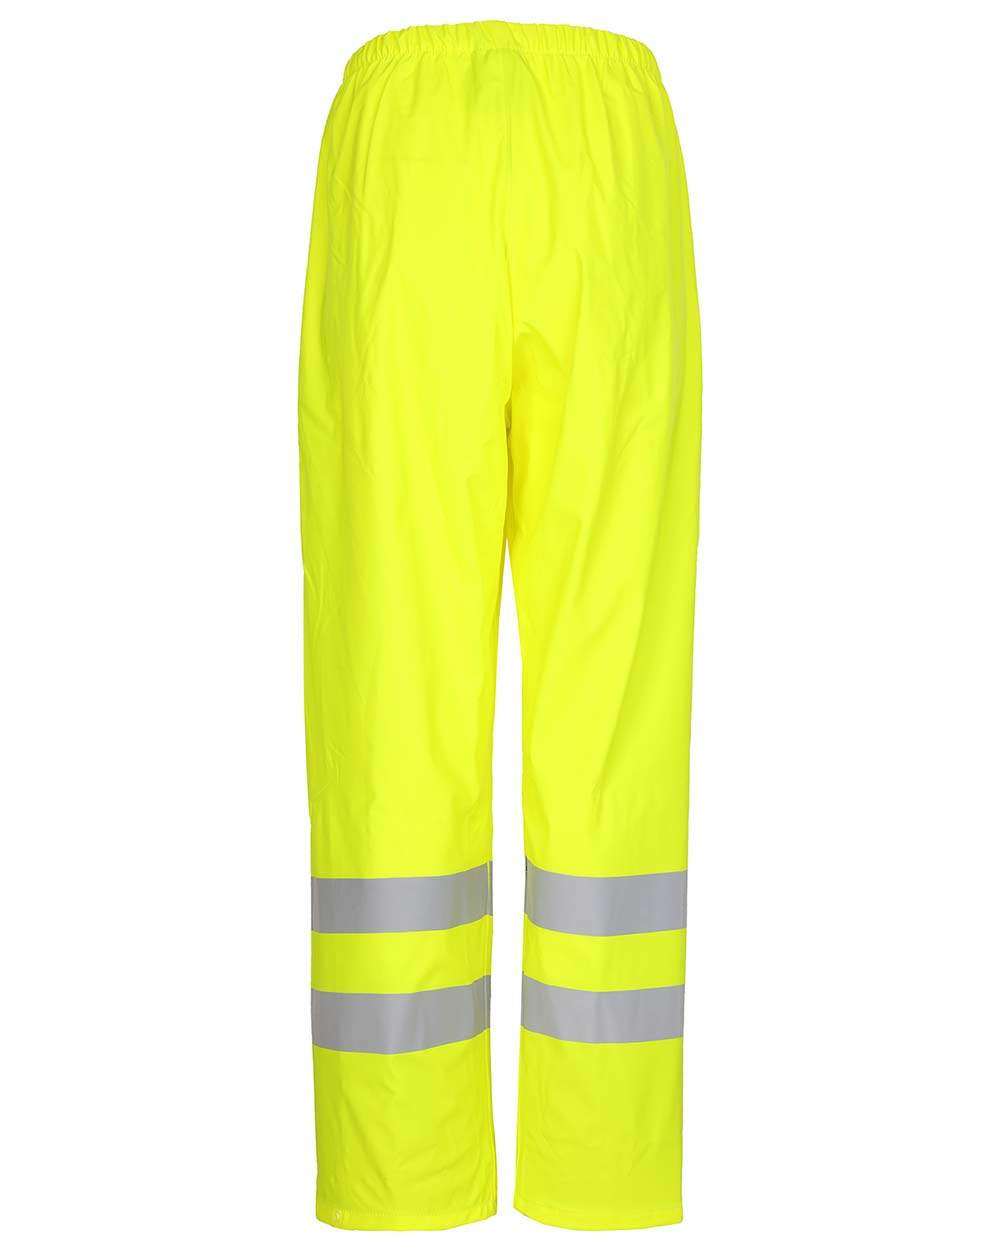 Back view Fort Mens Air Reflex Hi-Vis Trousers in yellow with Reflective strips